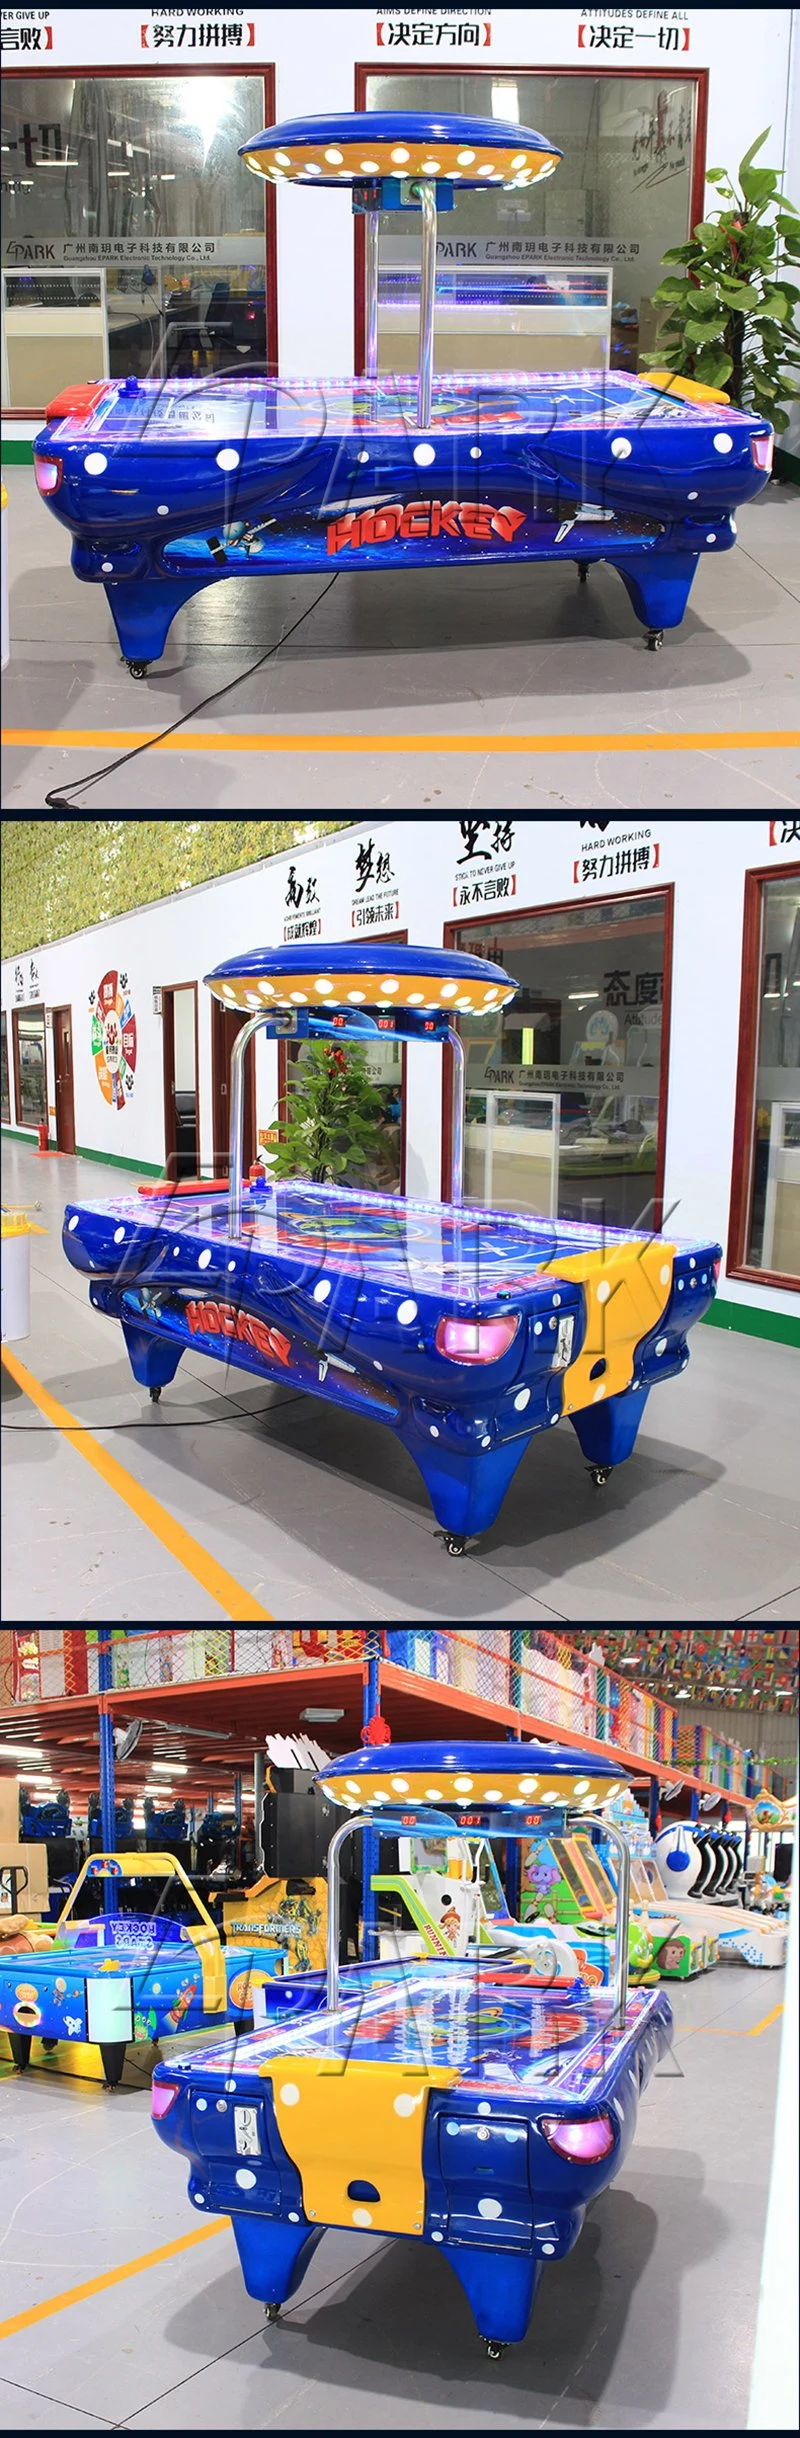 Commercial Sportcraft Four Foot Air Hockey Table Universe Hockey Table Indoor Sport Game Machine